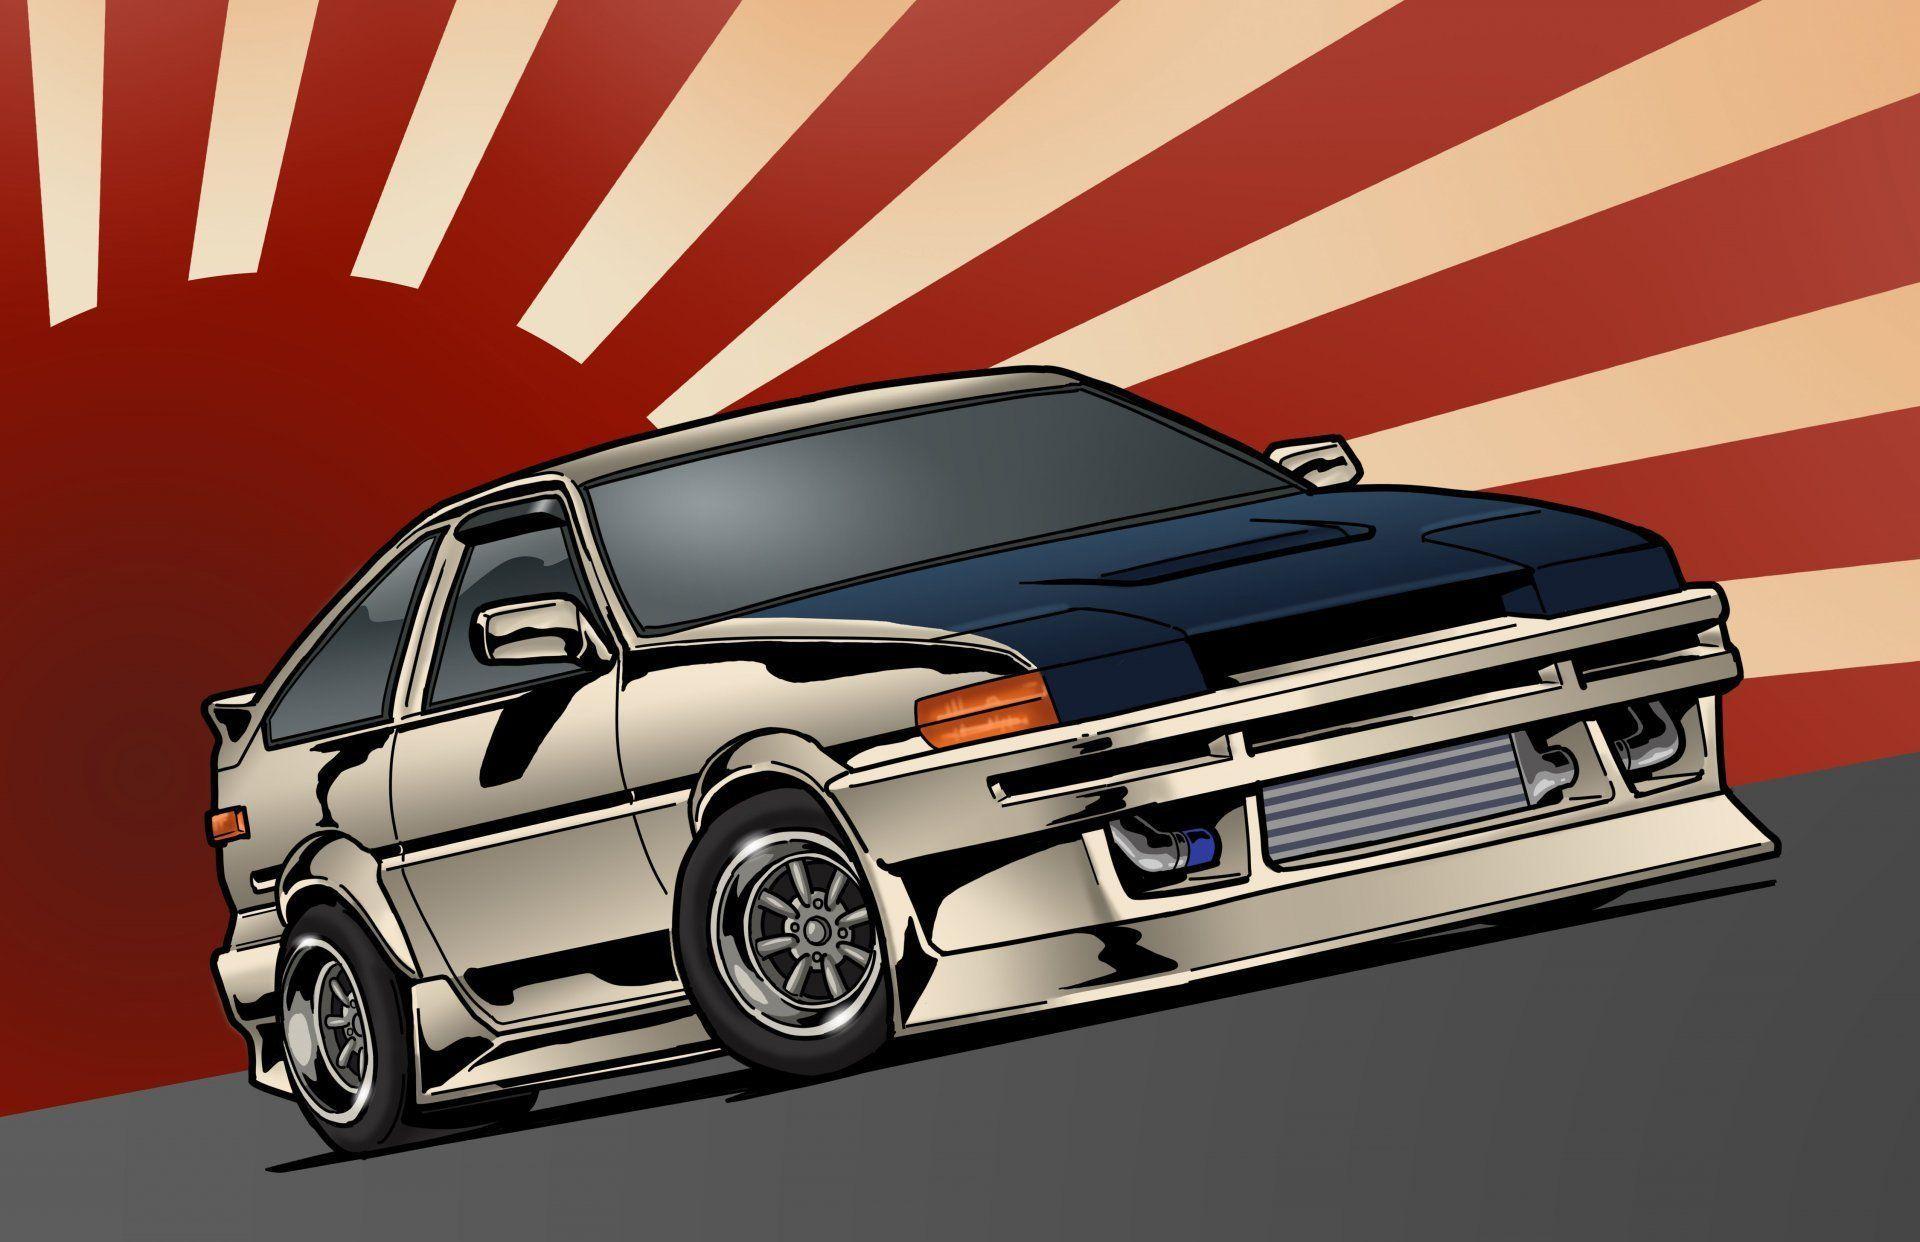 Drift Legend 4 AE86 Wallpaper  Download to your mobile from PHONEKY